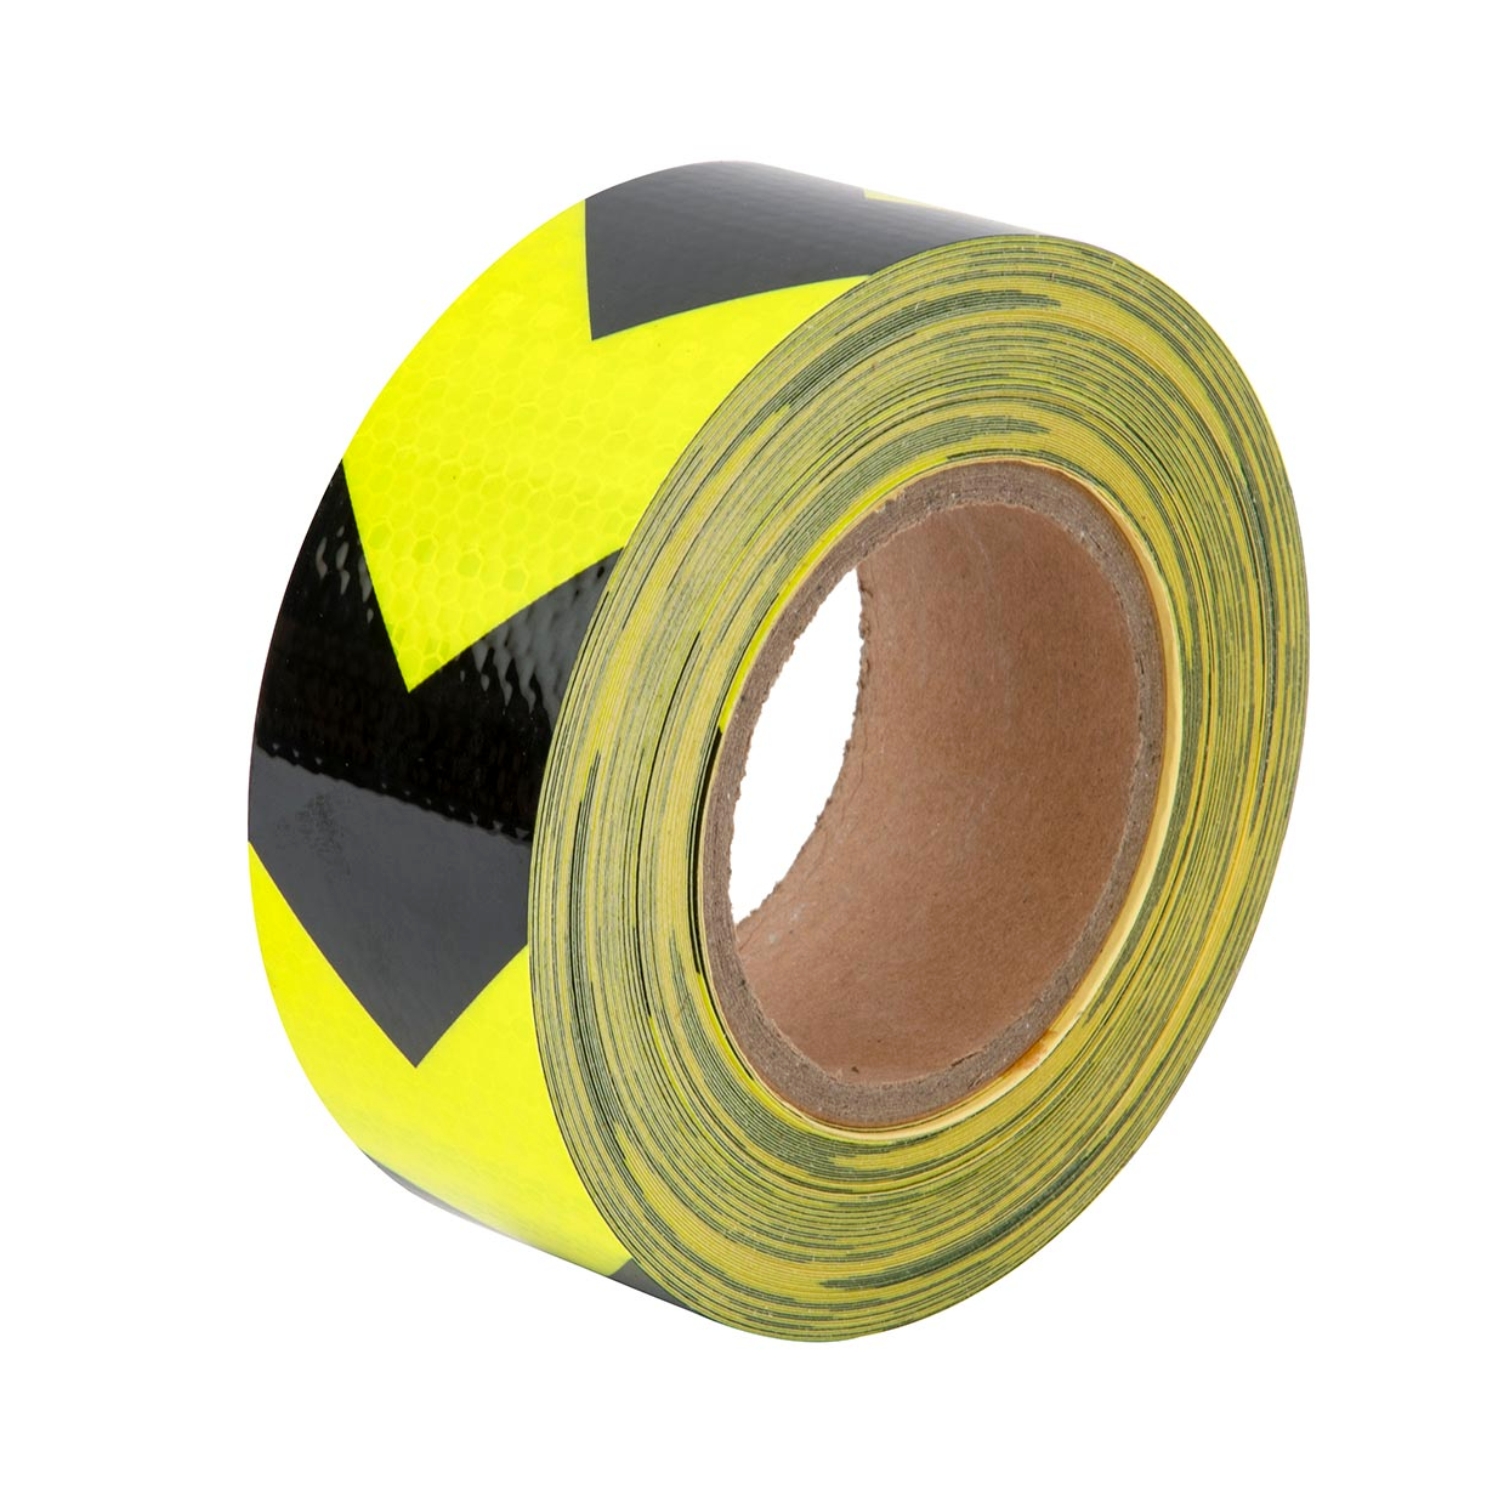 High Visibility Waterproof Adhesive Arrow Reflective PVC Safety Warning Tape 